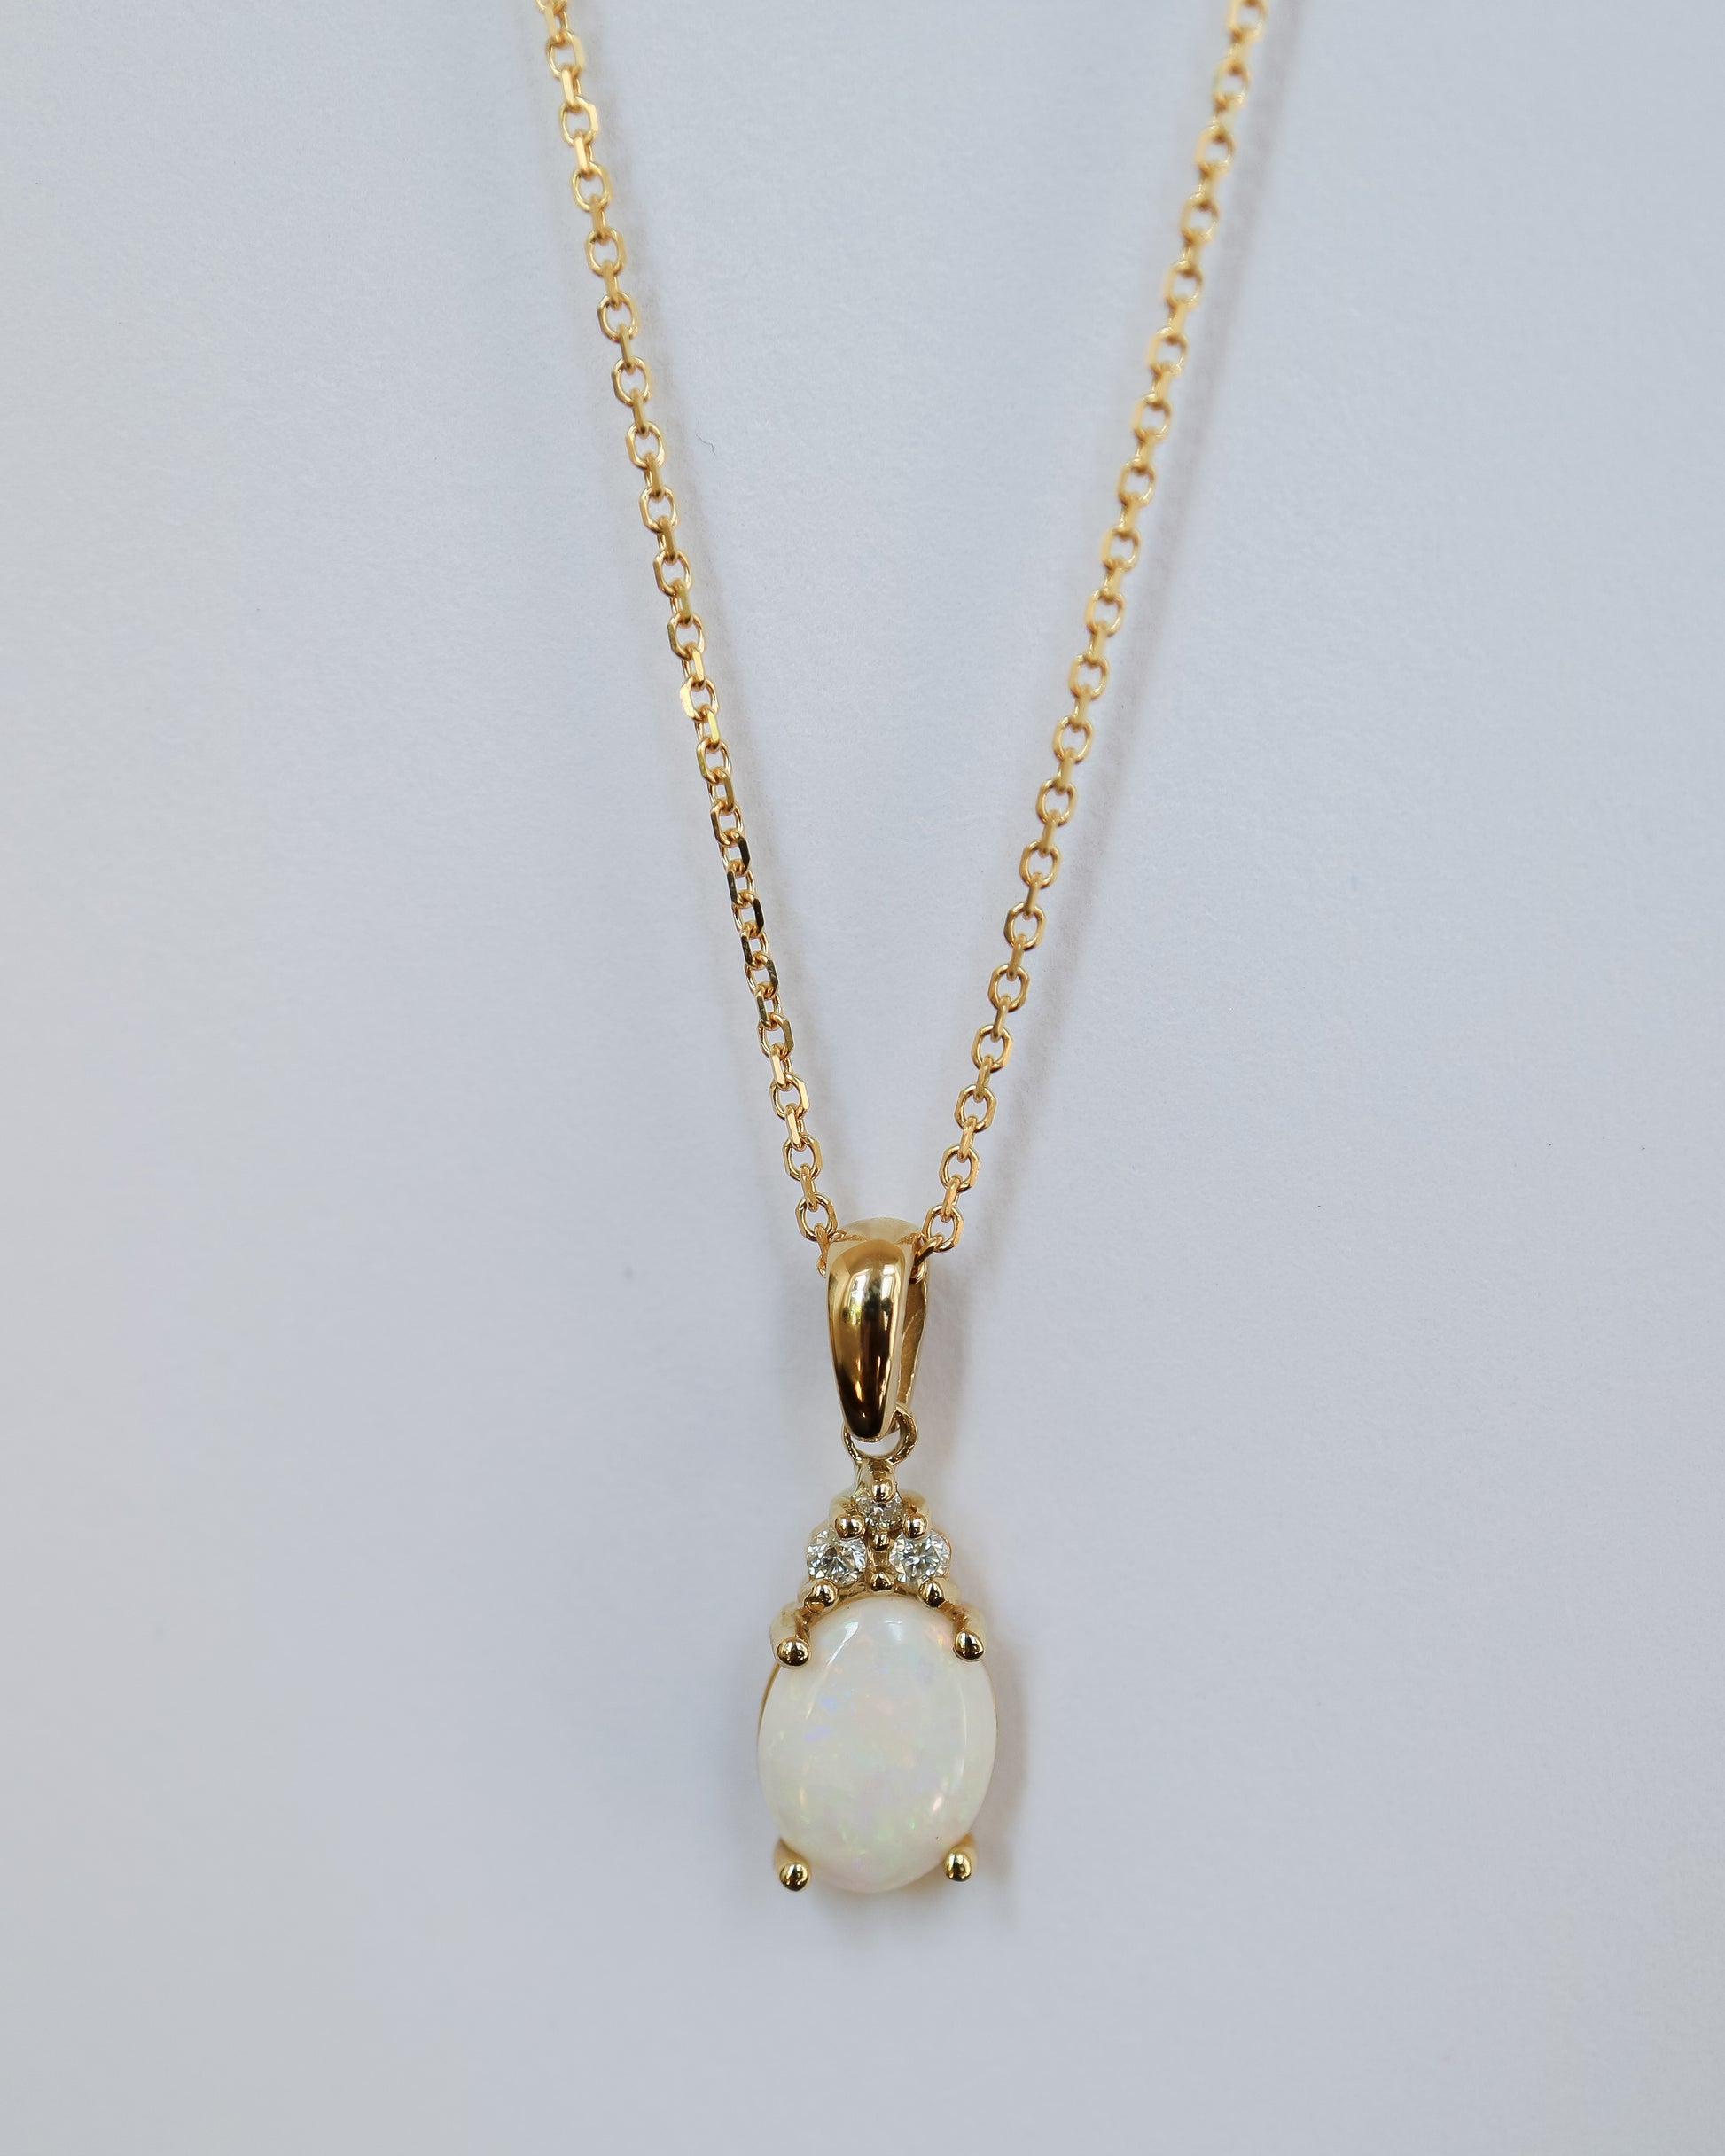 Opal and Diamond pendant in 9ct yellow gold